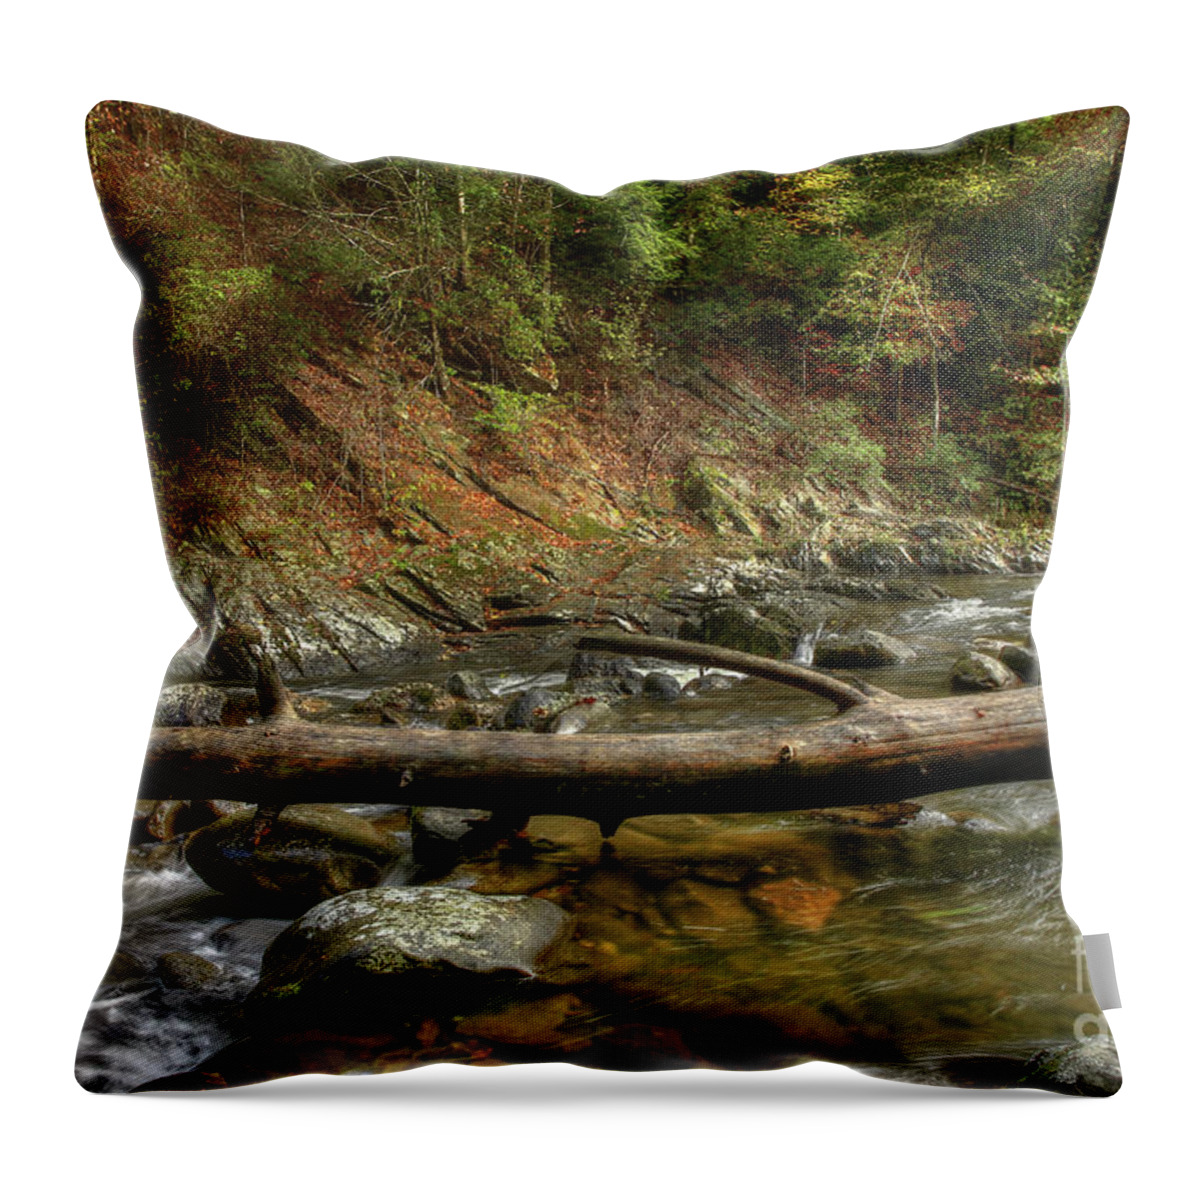 Tree Throw Pillow featuring the photograph Tree Across The River by Mike Eingle